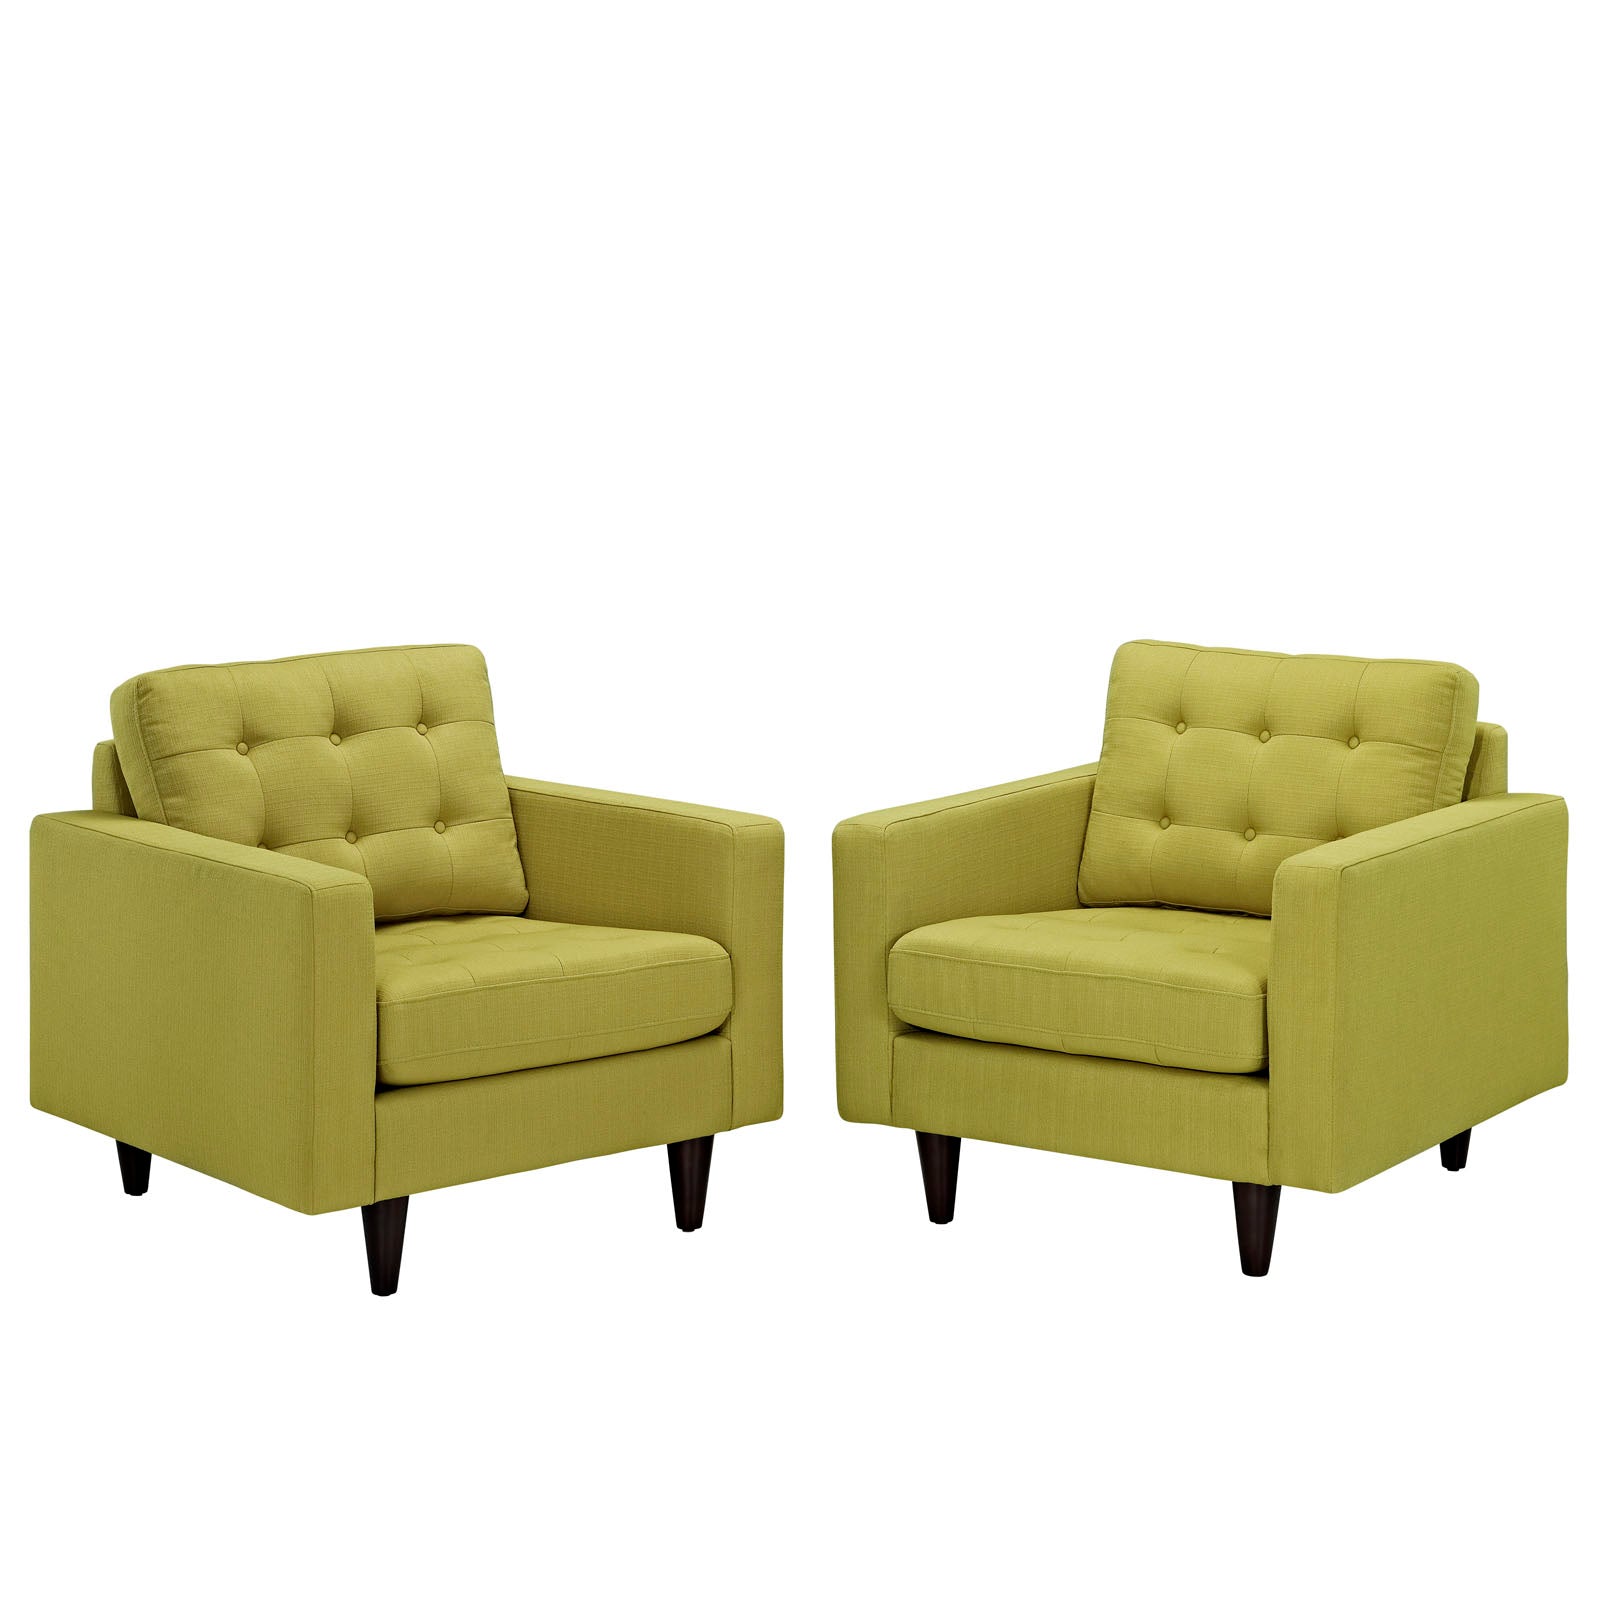 Modway Living Room Sets - Empress Armchair Upholstered Fabric Set Of 2 Wheatgrass